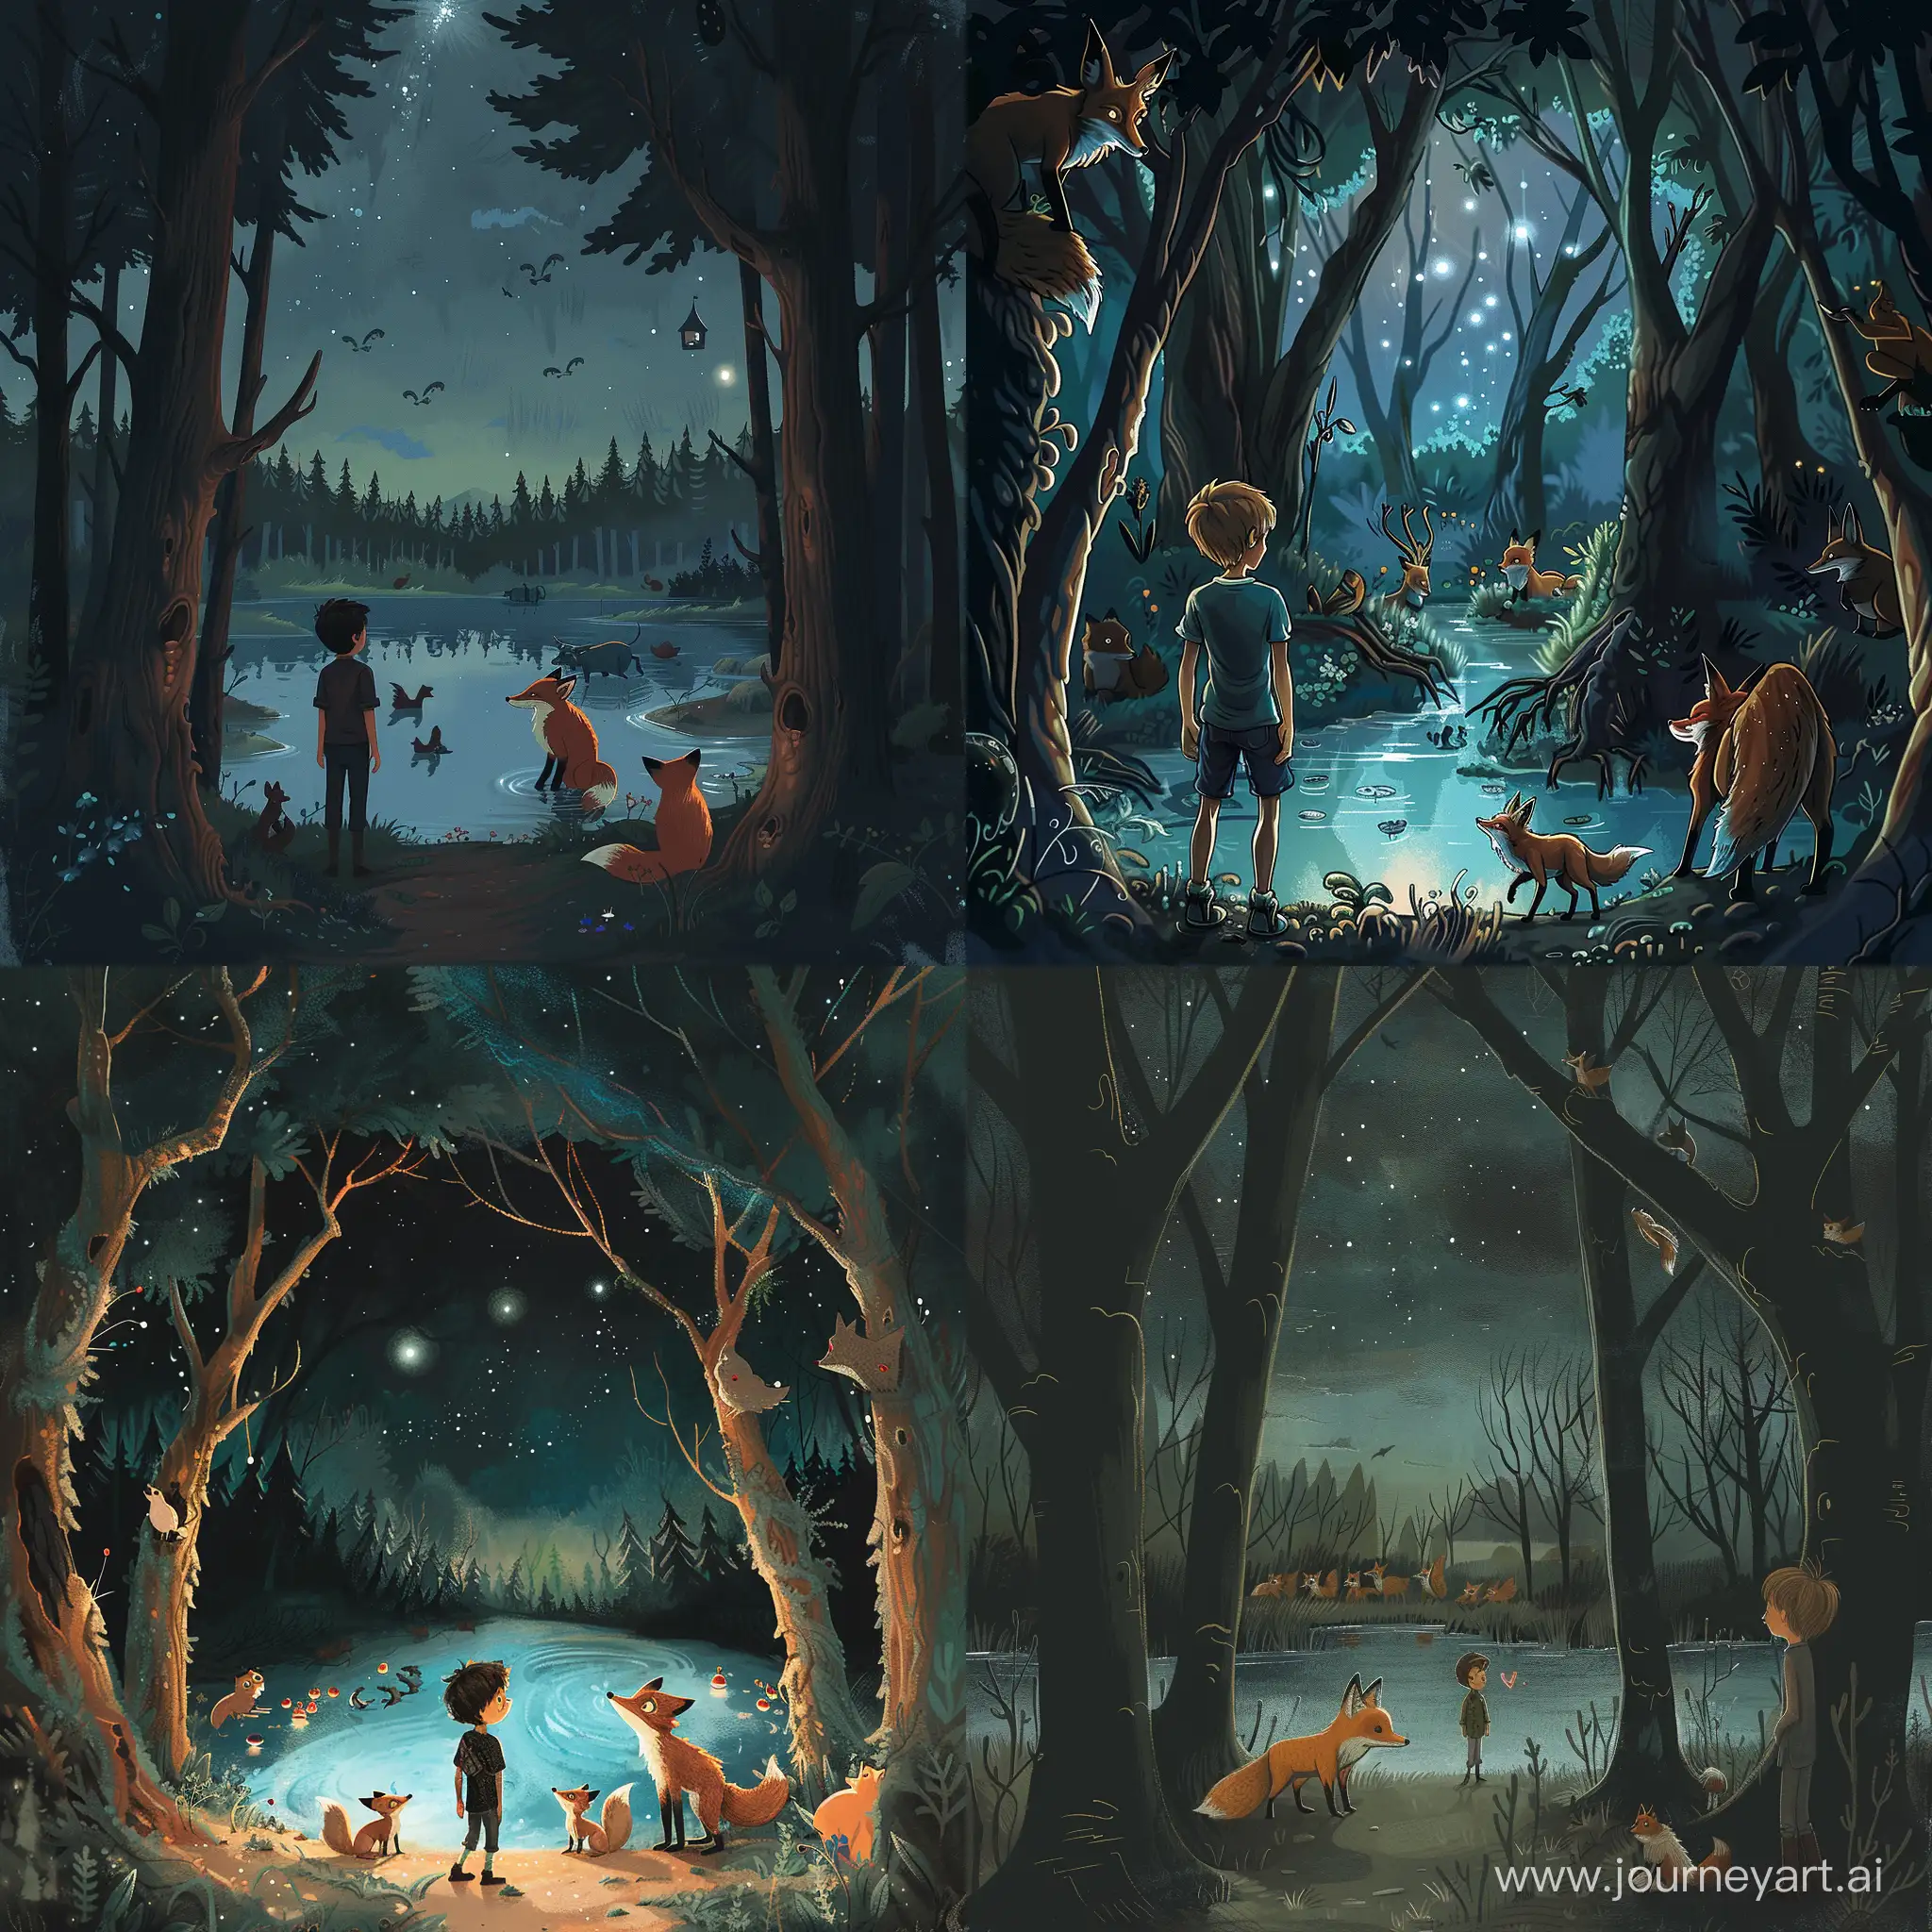 Adventurous-Teen-Explores-Enchanted-Forest-with-Talking-Fox-at-Dusk